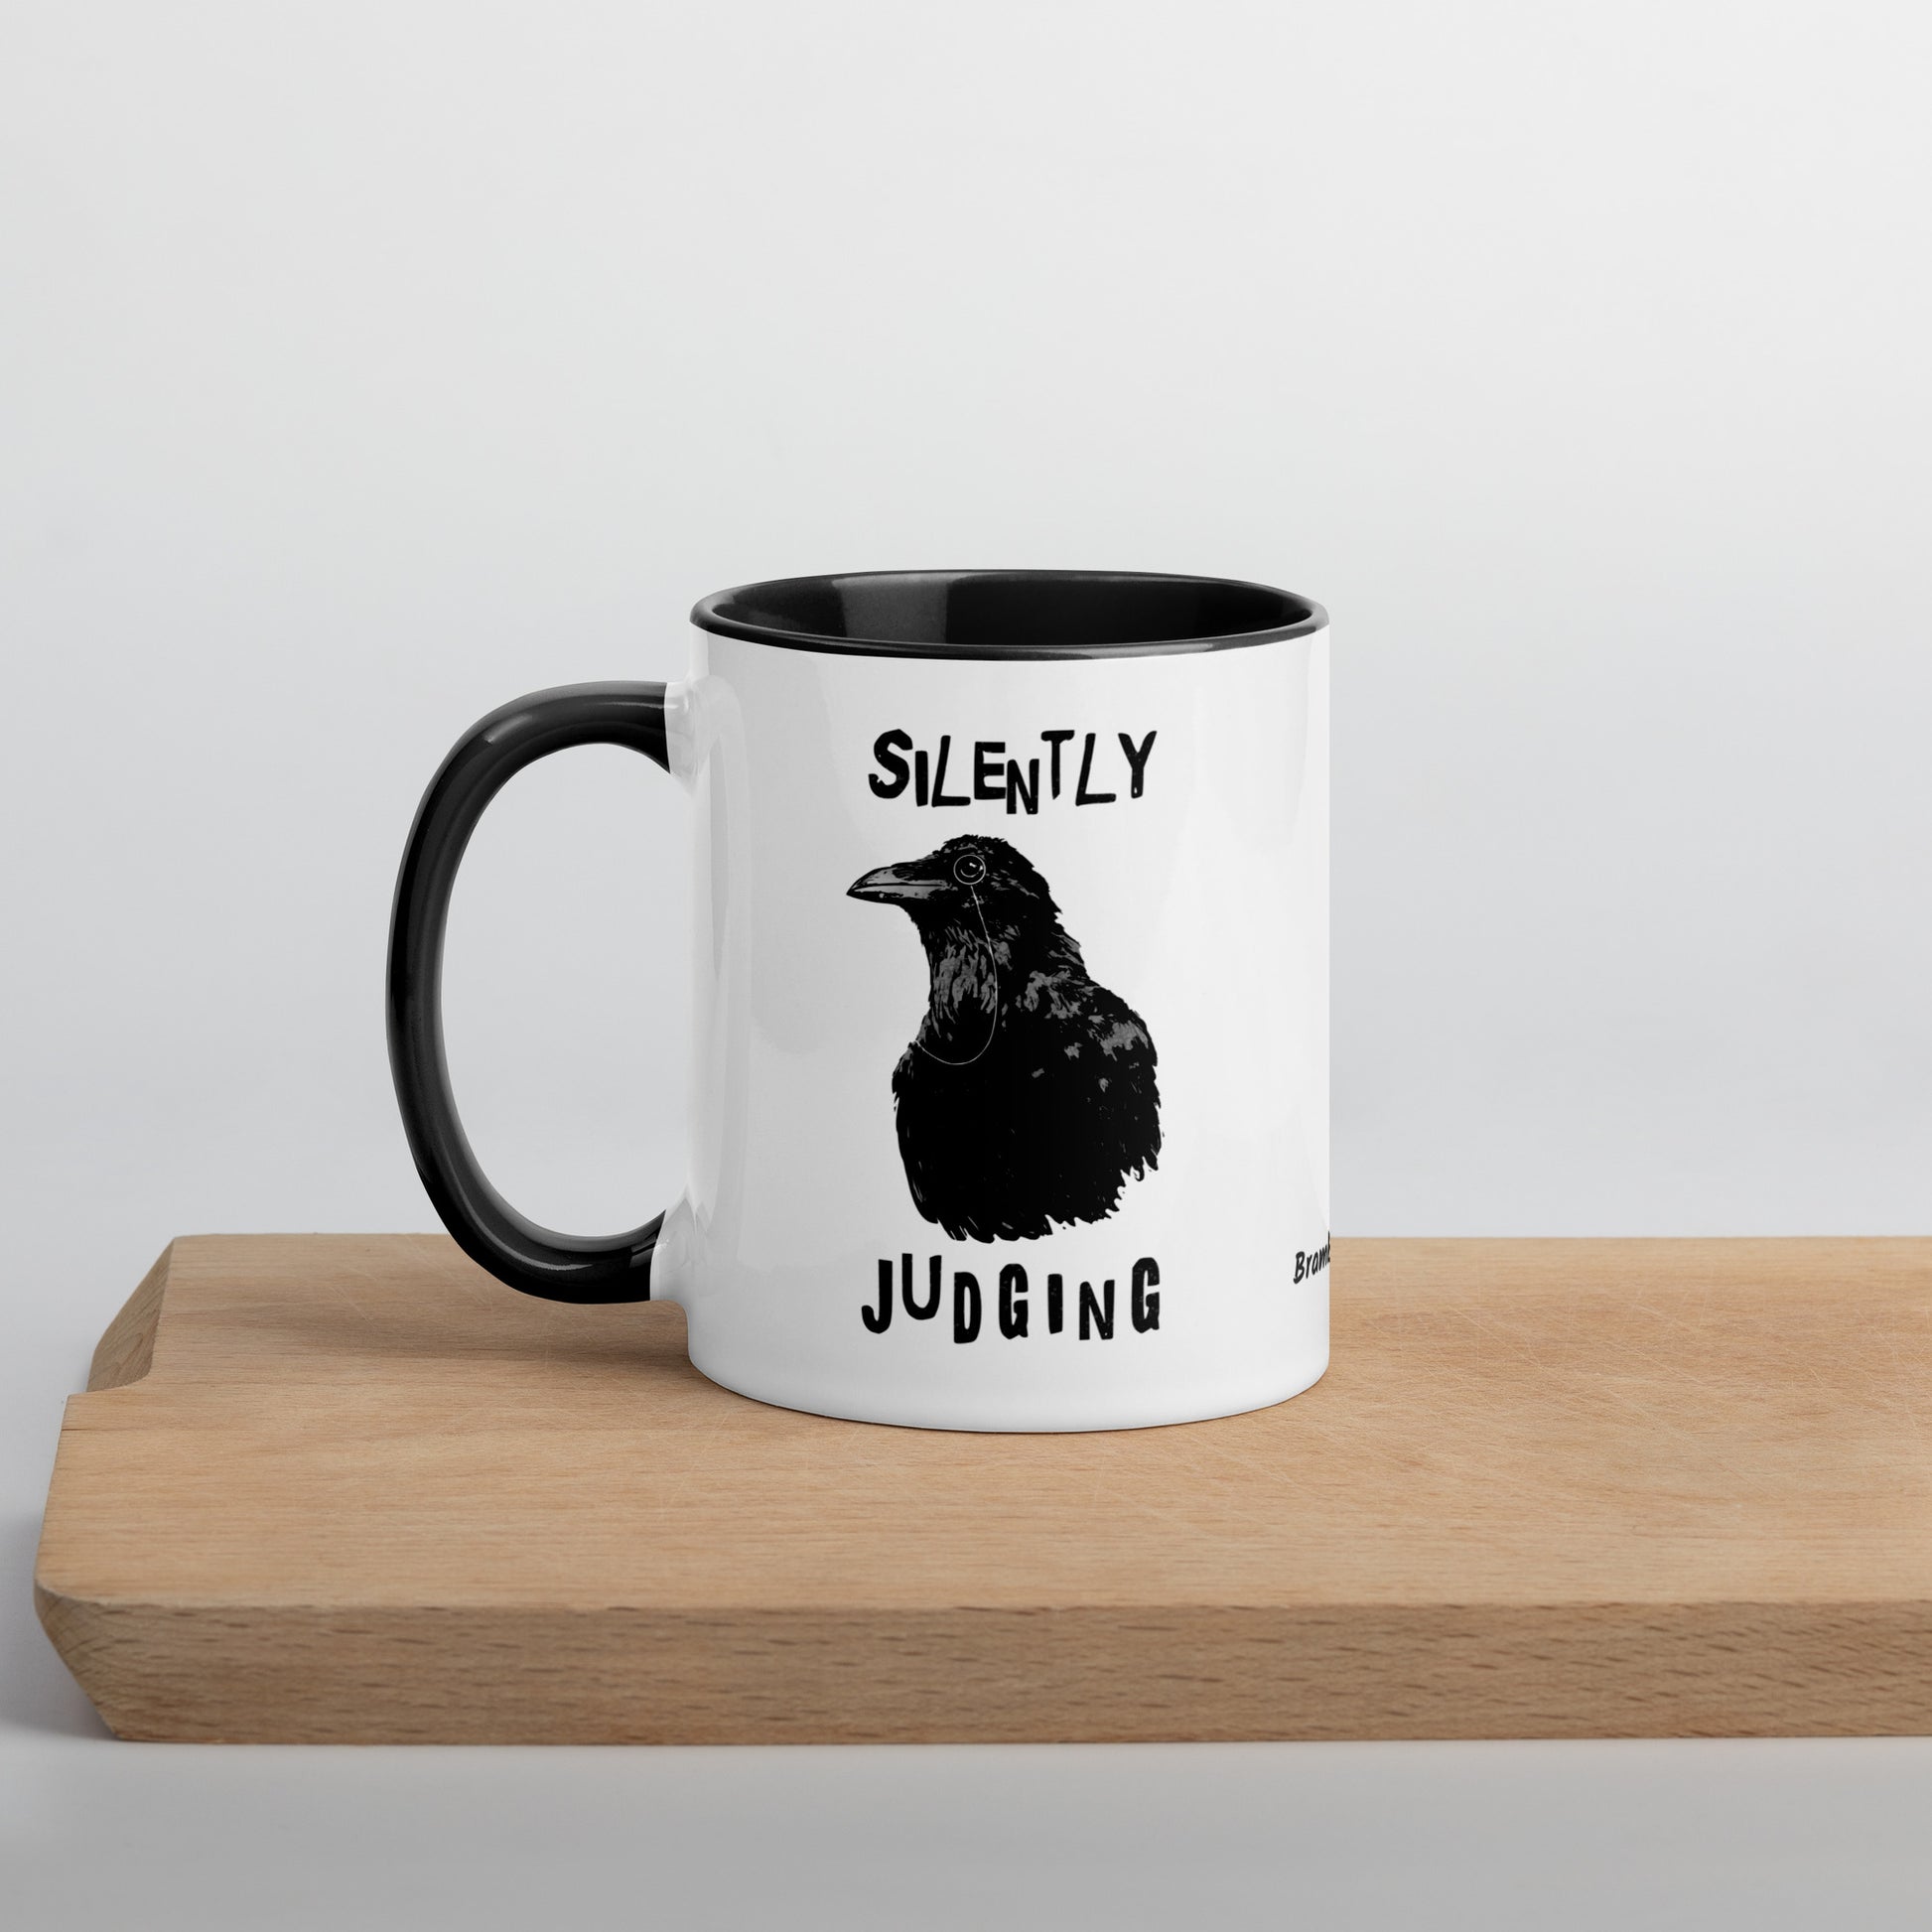 11 ounce ceramic mug with Silently Judging text surrounding a monacle-wearing crow. Double-sided design. Mug has black rim, handle, and inside. Shown sitting on wooden cutting board.